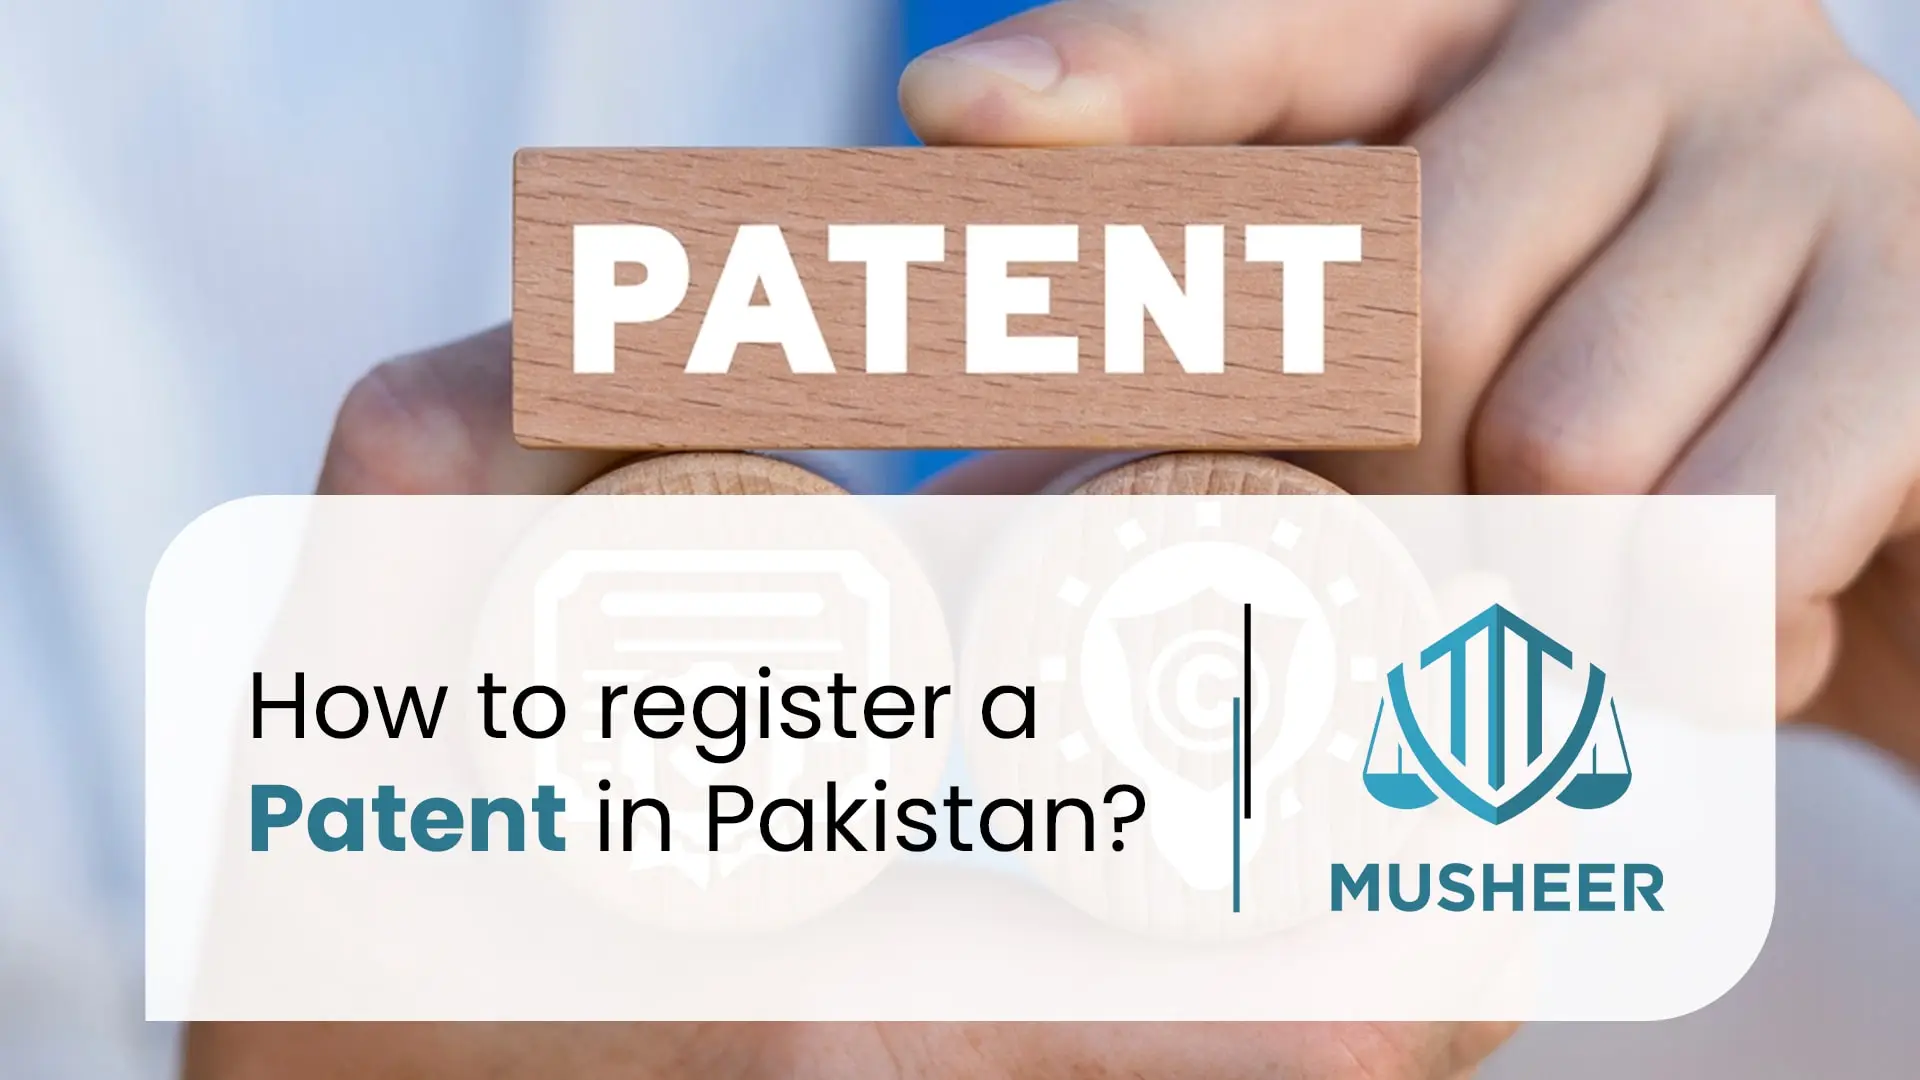 How to register a Patent in Pakistan